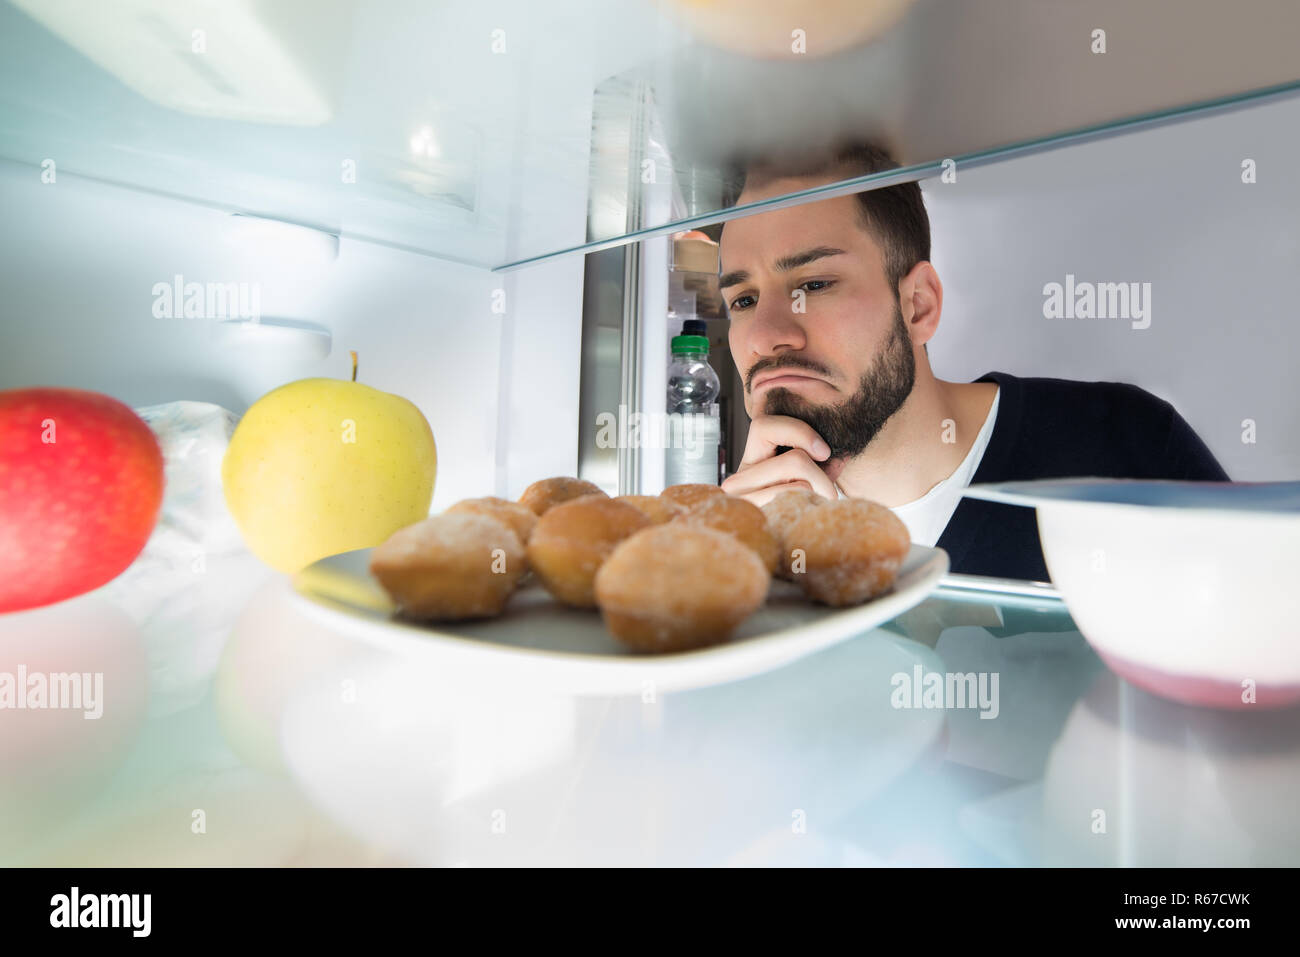 Close-up Of A Man Looking At Food Kept In Refrigerator Stock Photo